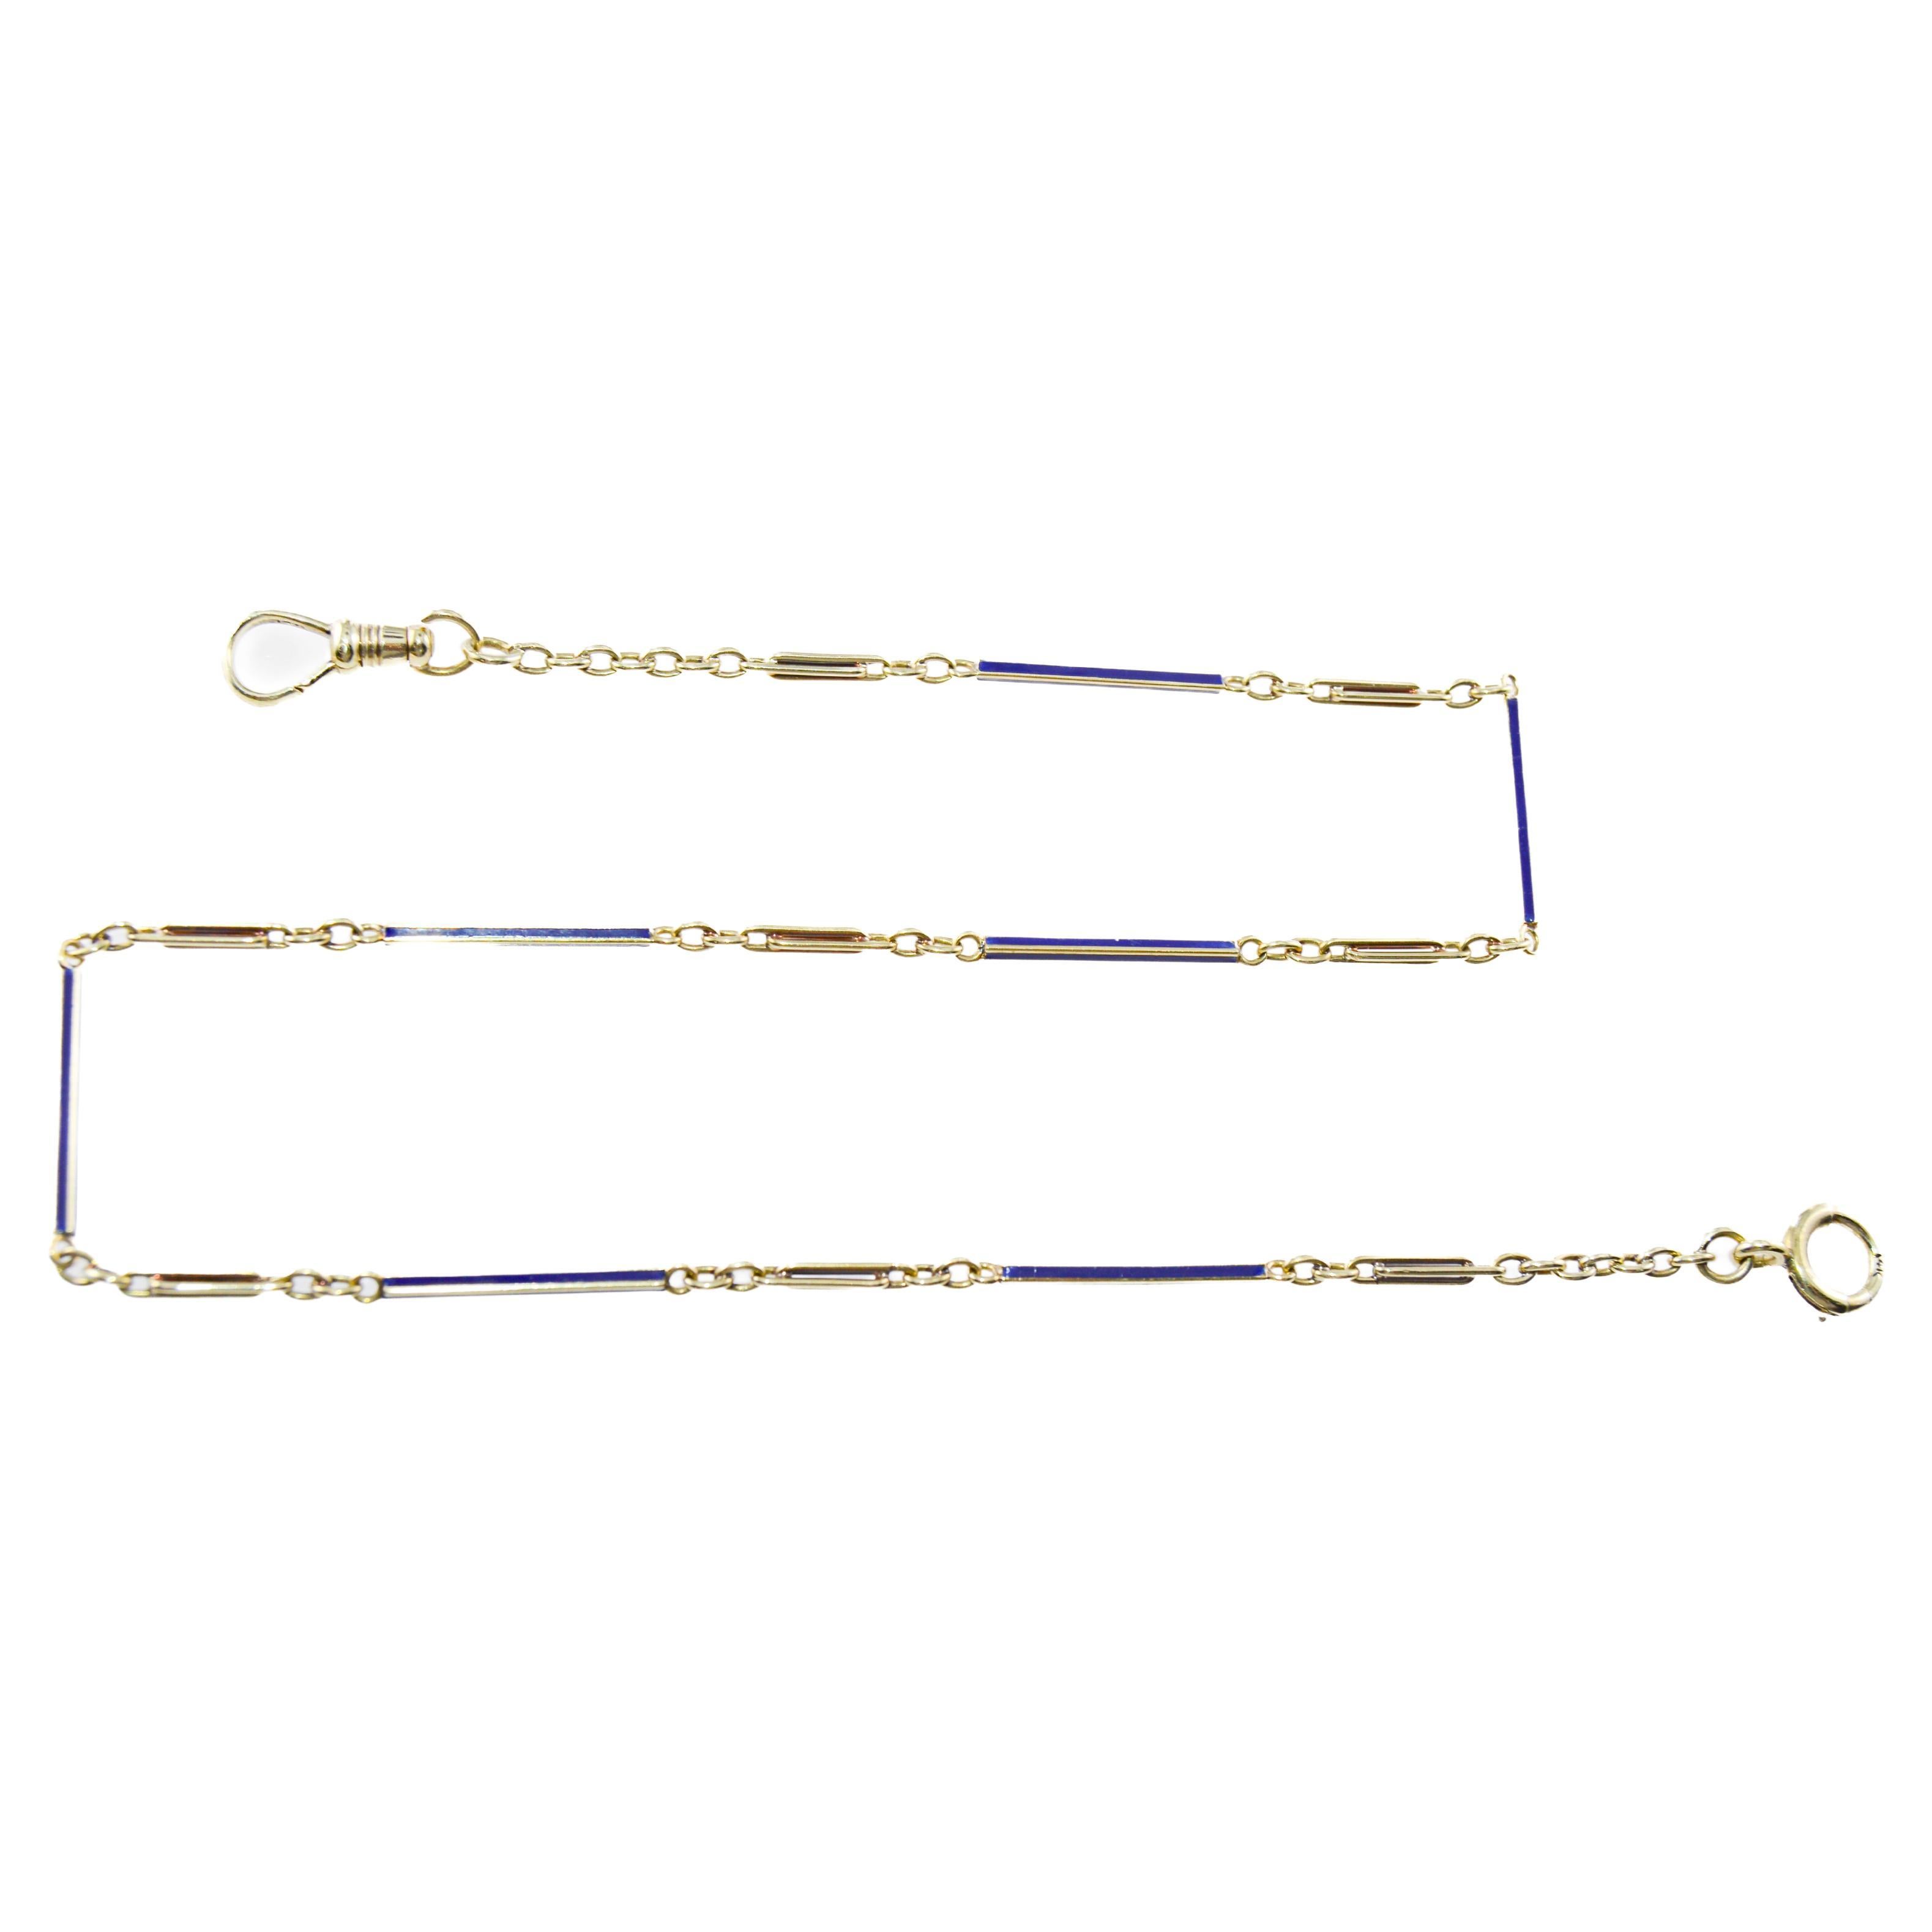 14Kt Yellow Gold & Blue Enamel Necklace, Bracelet or Pocket Watch Chain 1940's For Sale